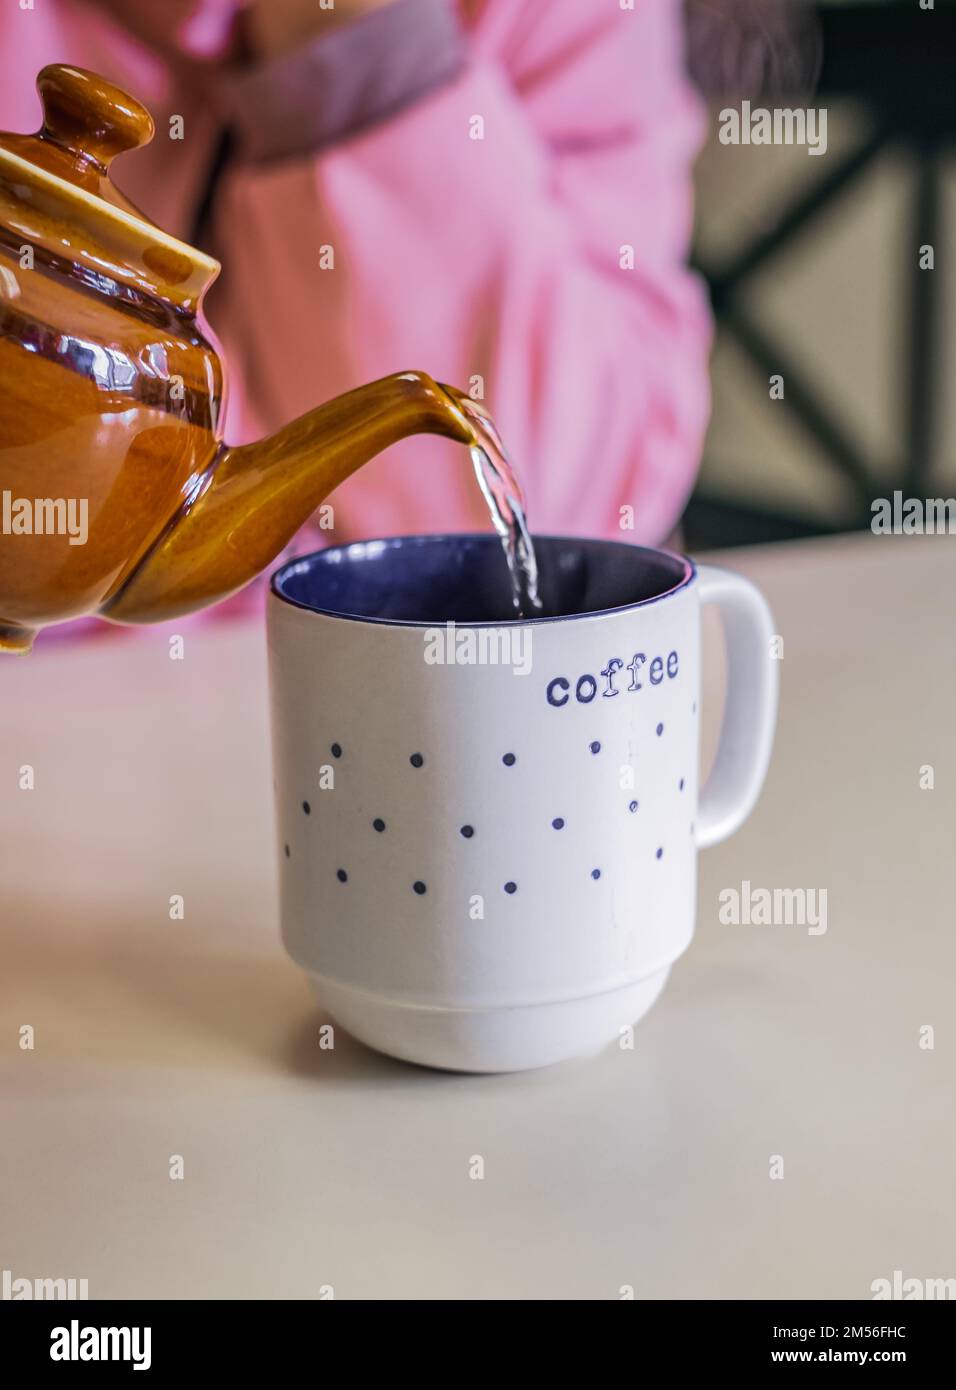 https://c8.alamy.com/comp/2M56FHC/hot-tea-in-teapot-and-cup-with-steam-on-a-table-woman-pour-tea-from-brown-teapot-into-a-cup-the-process-of-brewing-tea-pouring-hot-water-from-the-k-2M56FHC.jpg